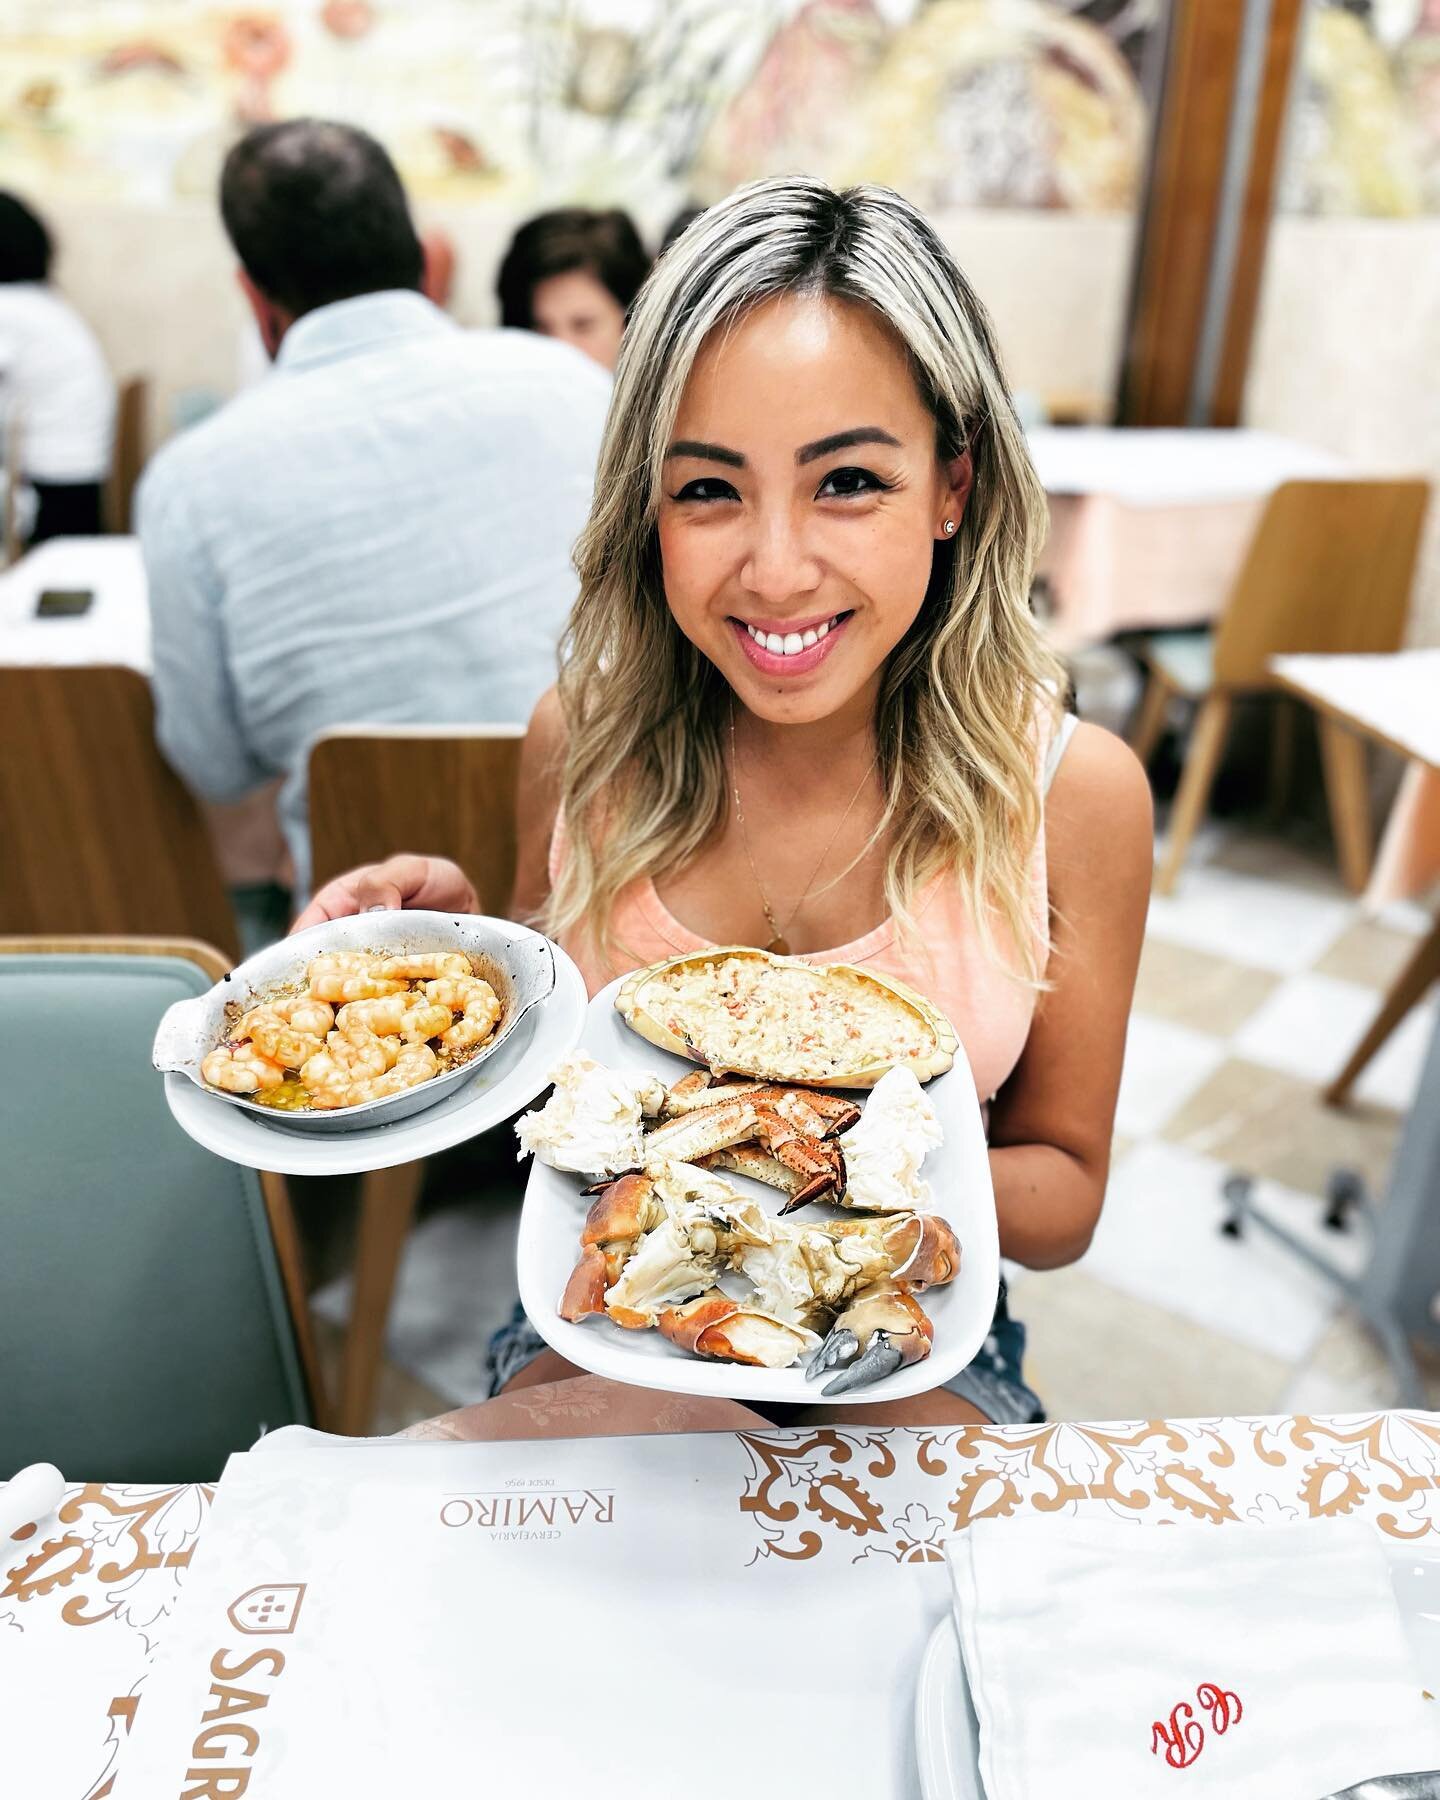 📍Lisboa, Portugal! Better late than never, check out https://enzaeats.com/travels for my last leg in Portugal following Porto and Coimbra. From the wide array of food to the seemingly never ending sight seeing and activities you could partake in - I